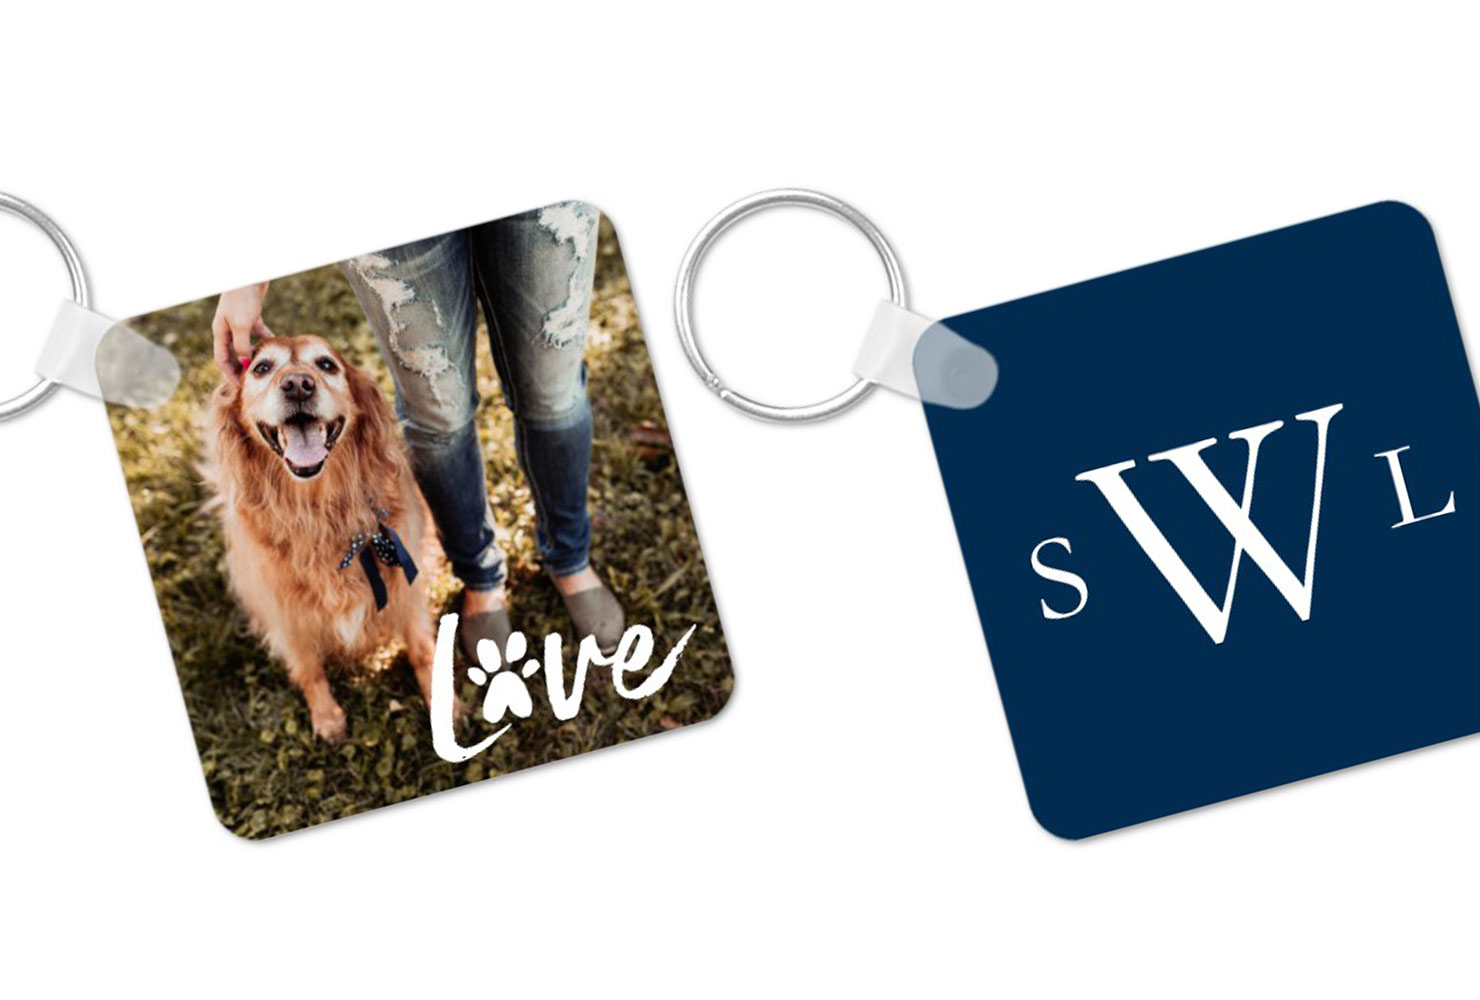 Monogrammed keychain with picture of dog.